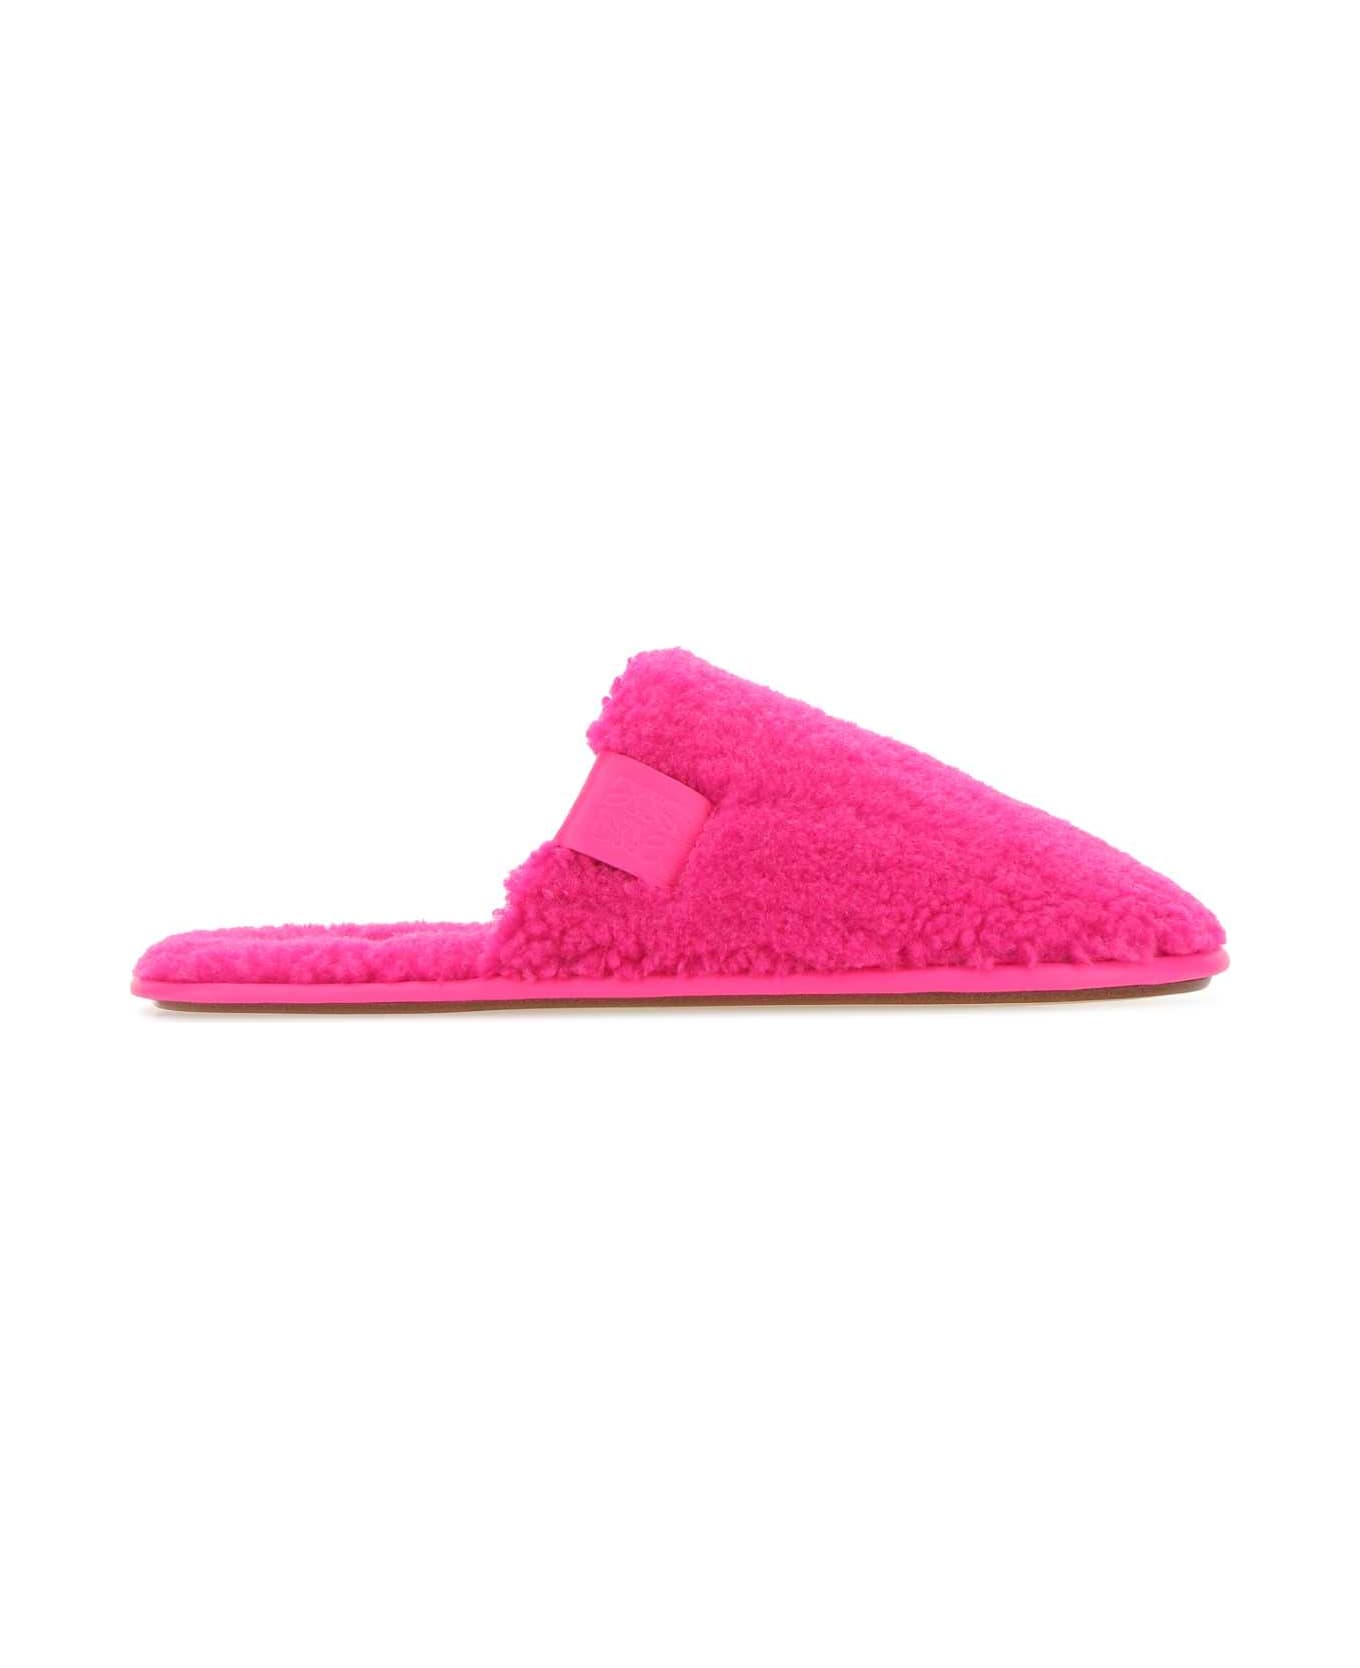 Loewe Fluo Pink Eco Shearling Slippers - NEONPINK その他各種シューズ